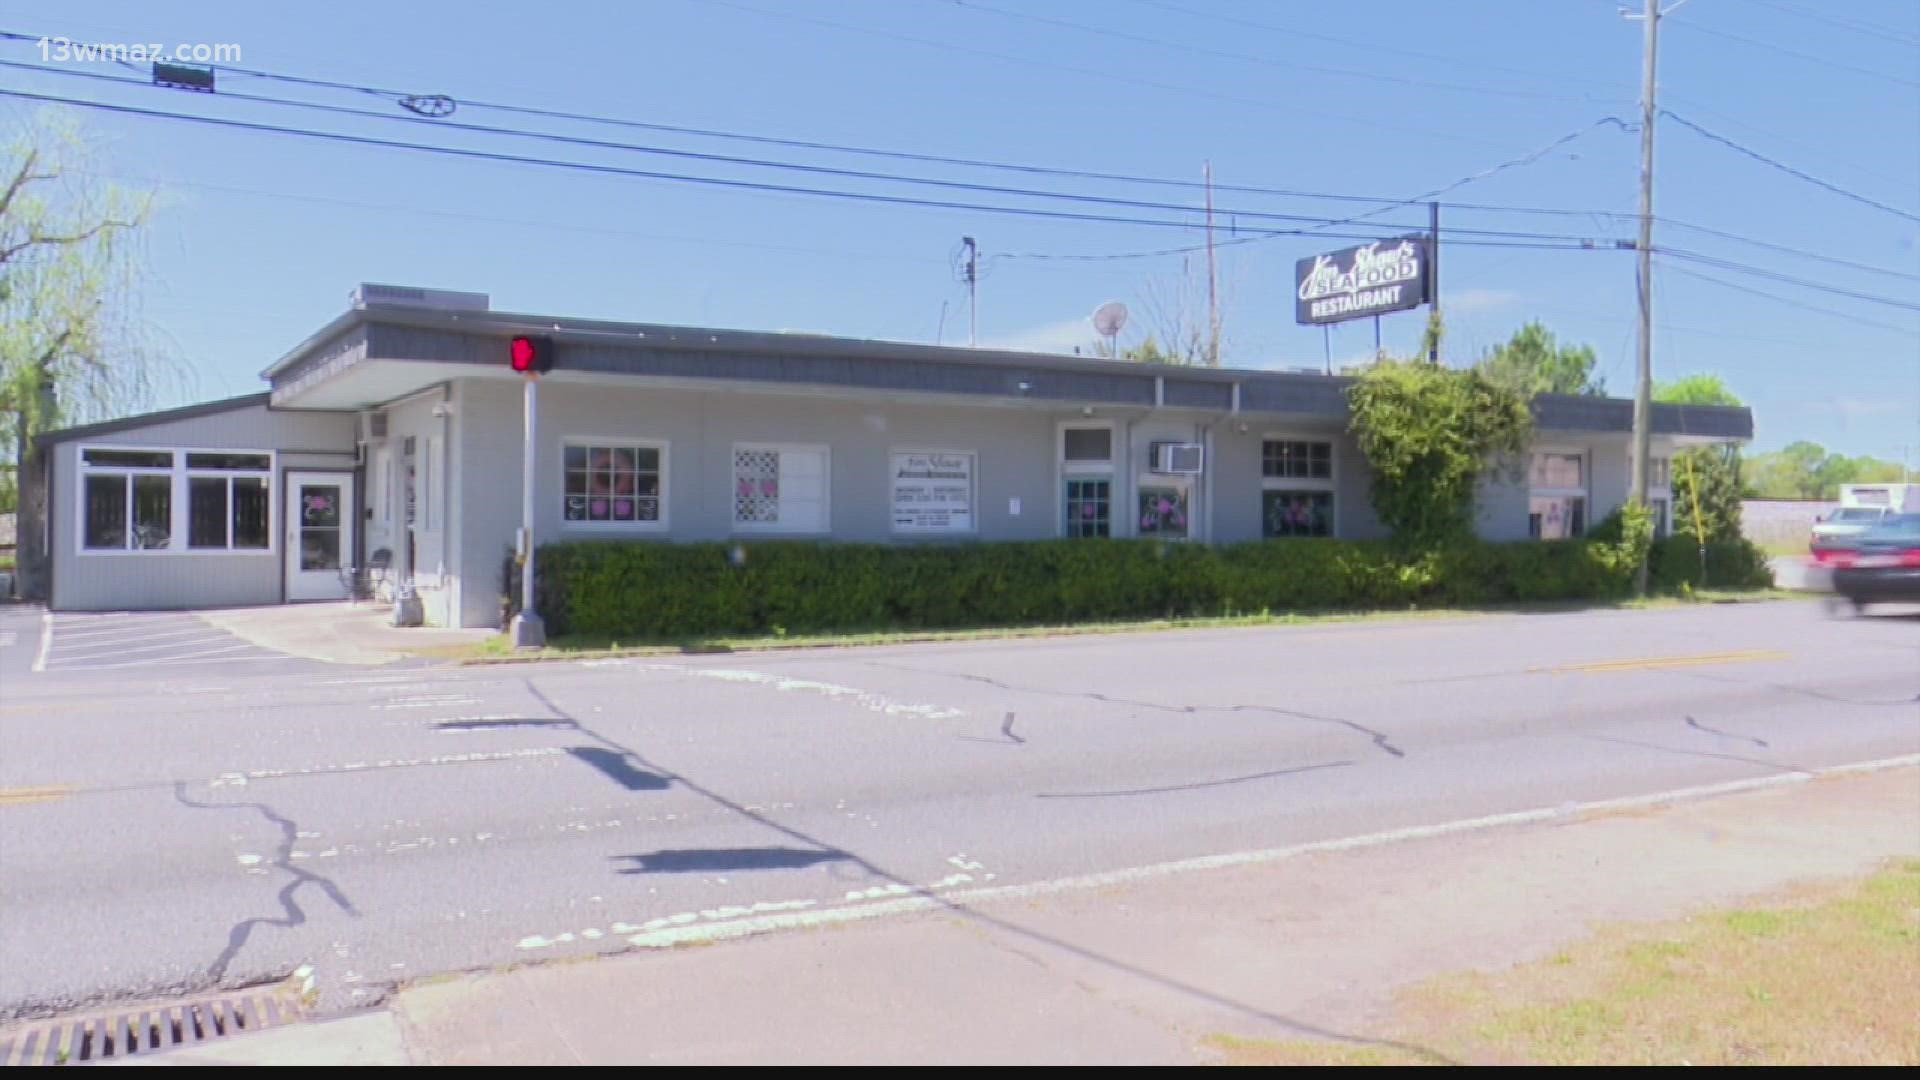 The Bibb County Sheriff’s Office is investigating after a robbery attempt in the parking lot of a popular Macon restaurant.